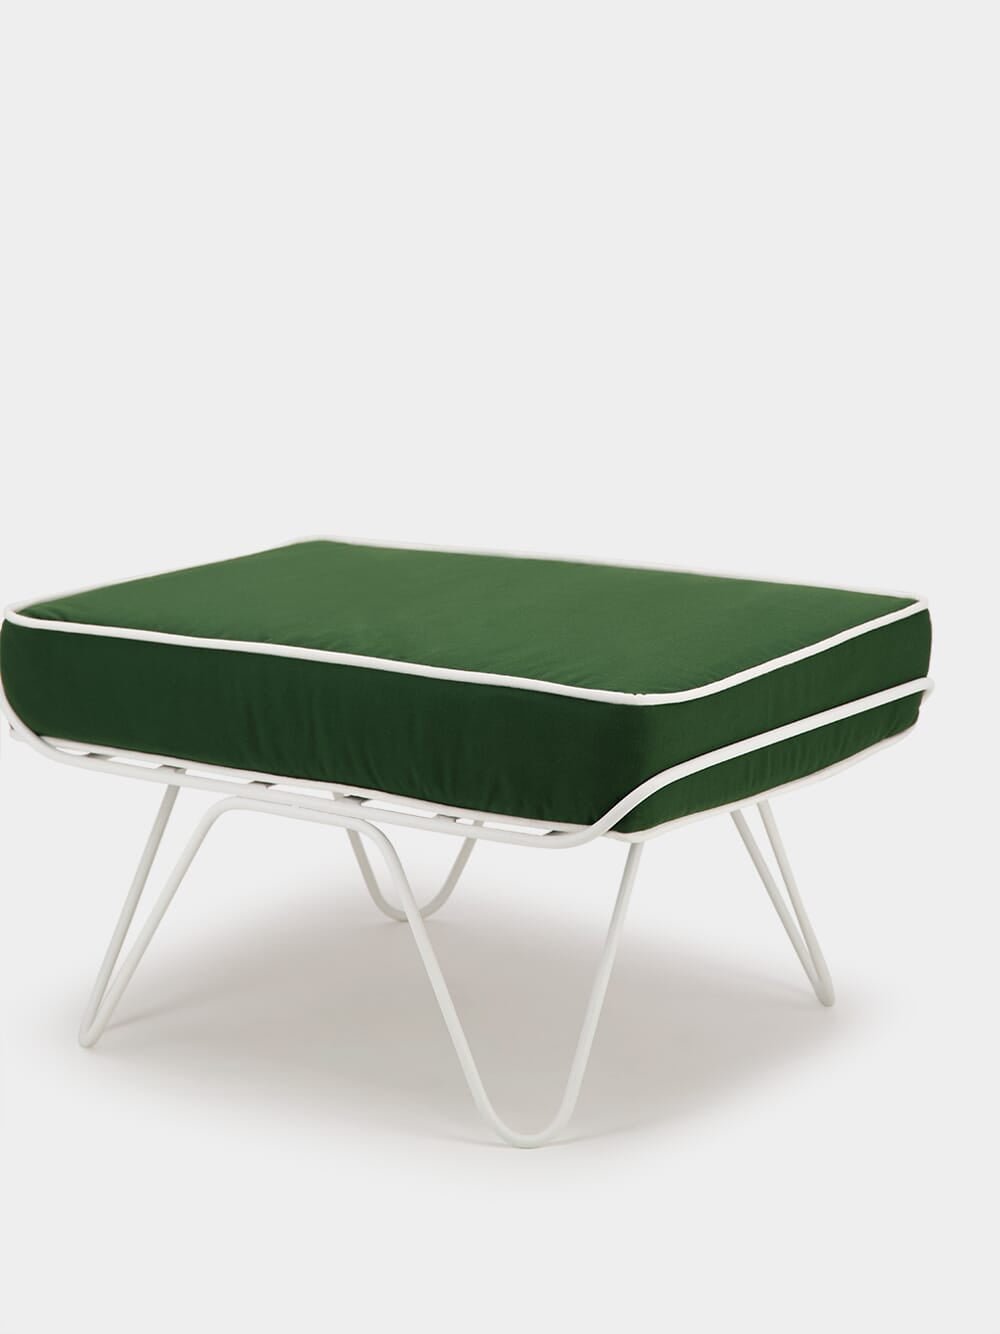 HonoréForest Green Croisette Outdoor Ottoman at Fashion Clinic